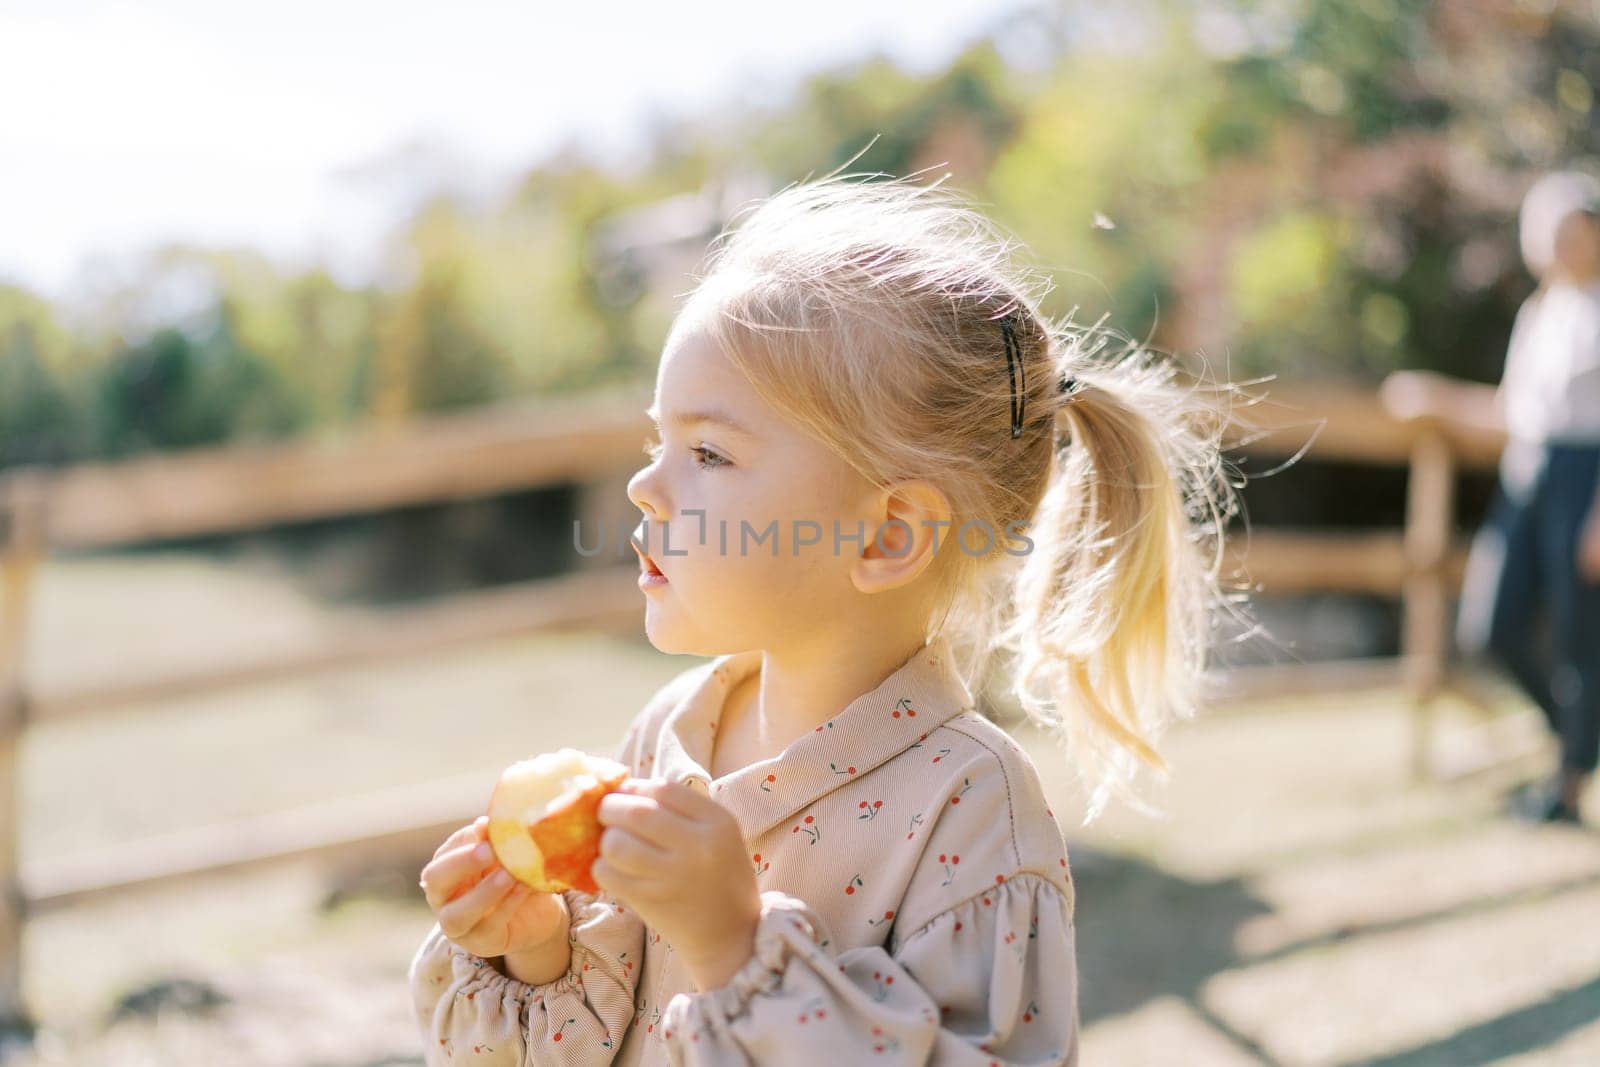 Little girl looks into the distance holding a bitten apple in her hands while standing in the park. High quality photo